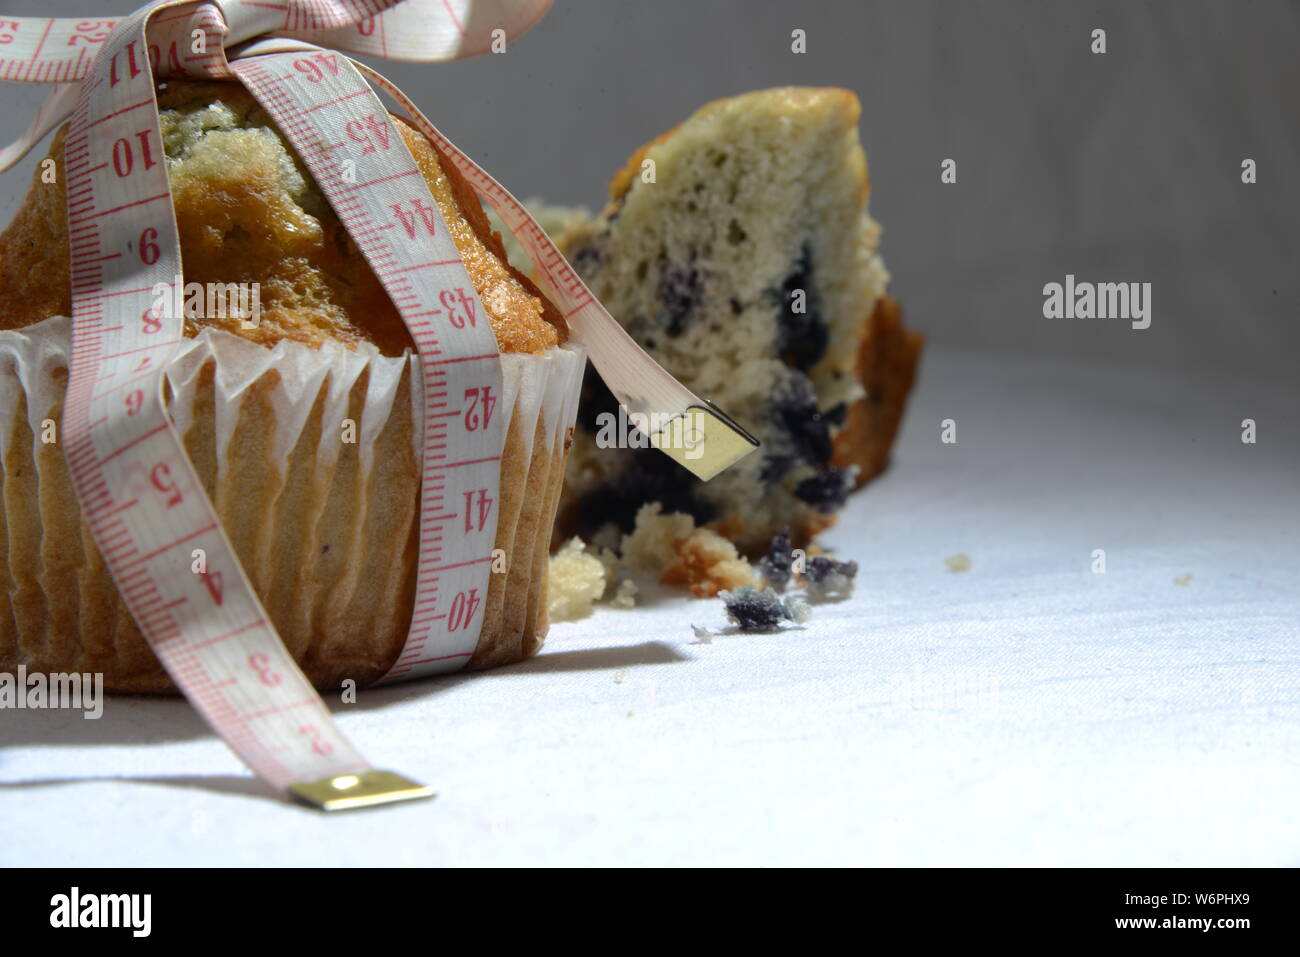 cup cake and cakes and loosing weight biscuit getting fat and sizing symbol of  weight meter cake from close meaningful photo junk food Stock Photo